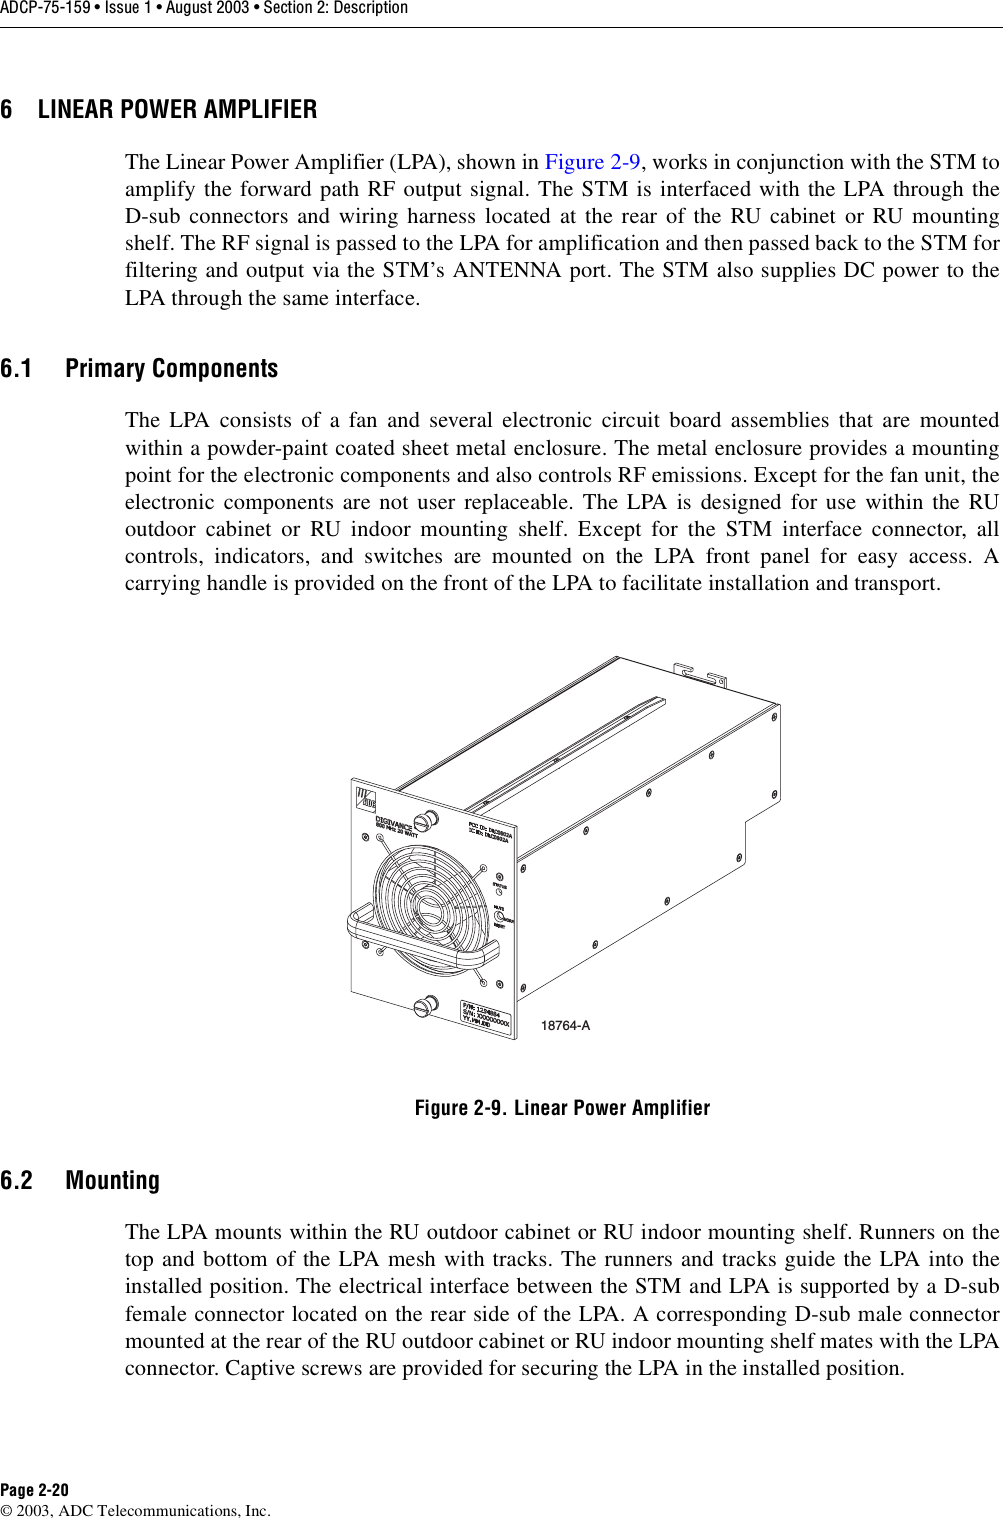 ADCP-75-159 • Issue 1 • August 2003 • Section 2: DescriptionPage 2-20© 2003, ADC Telecommunications, Inc.6 LINEAR POWER AMPLIFIERThe Linear Power Amplifier (LPA), shown in Figure 2-9, works in conjunction with the STM toamplify the forward path RF output signal. The STM is interfaced with the LPA through theD-sub connectors and wiring harness located at the rear of the RU cabinet or RU mountingshelf. The RF signal is passed to the LPA for amplification and then passed back to the STM forfiltering and output via the STM’s ANTENNA port. The STM also supplies DC power to theLPA through the same interface. 6.1 Primary ComponentsThe LPA consists of a fan and several electronic circuit board assemblies that are mountedwithin a powder-paint coated sheet metal enclosure. The metal enclosure provides a mountingpoint for the electronic components and also controls RF emissions. Except for the fan unit, theelectronic components are not user replaceable. The LPA is designed for use within the RUoutdoor cabinet or RU indoor mounting shelf. Except for the STM interface connector, allcontrols, indicators, and switches are mounted on the LPA front panel for easy access. Acarrying handle is provided on the front of the LPA to facilitate installation and transport. Figure 2-9. Linear Power Amplifier6.2 MountingThe LPA mounts within the RU outdoor cabinet or RU indoor mounting shelf. Runners on thetop and bottom of the LPA mesh with tracks. The runners and tracks guide the LPA into theinstalled position. The electrical interface between the STM and LPA is supported by a D-subfemale connector located on the rear side of the LPA. A corresponding D-sub male connectormounted at the rear of the RU outdoor cabinet or RU indoor mounting shelf mates with the LPAconnector. Captive screws are provided for securing the LPA in the installed position. 18764-A